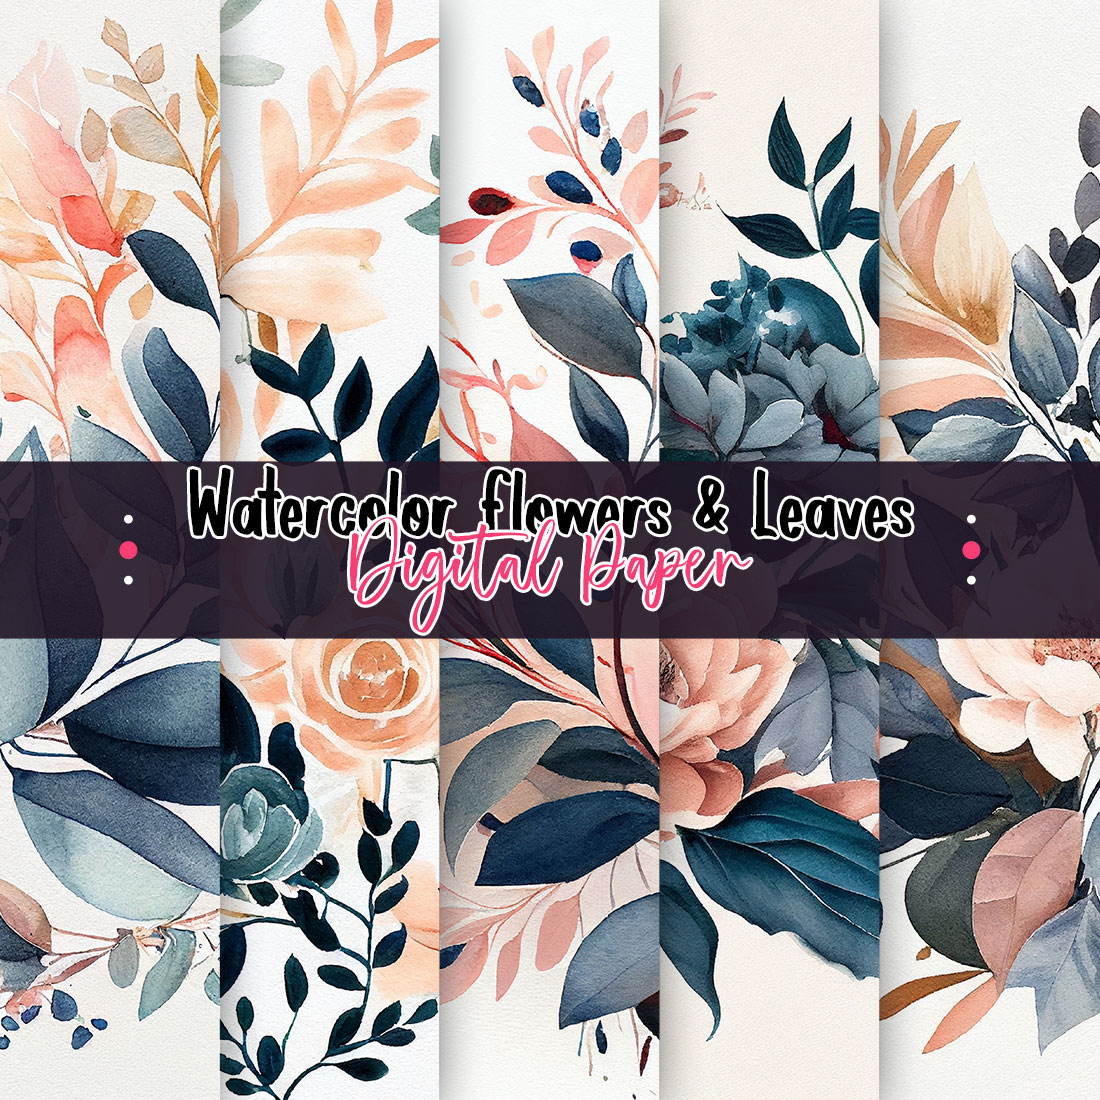 Watercolor Flowers and Leaves Digital Paper cover image.